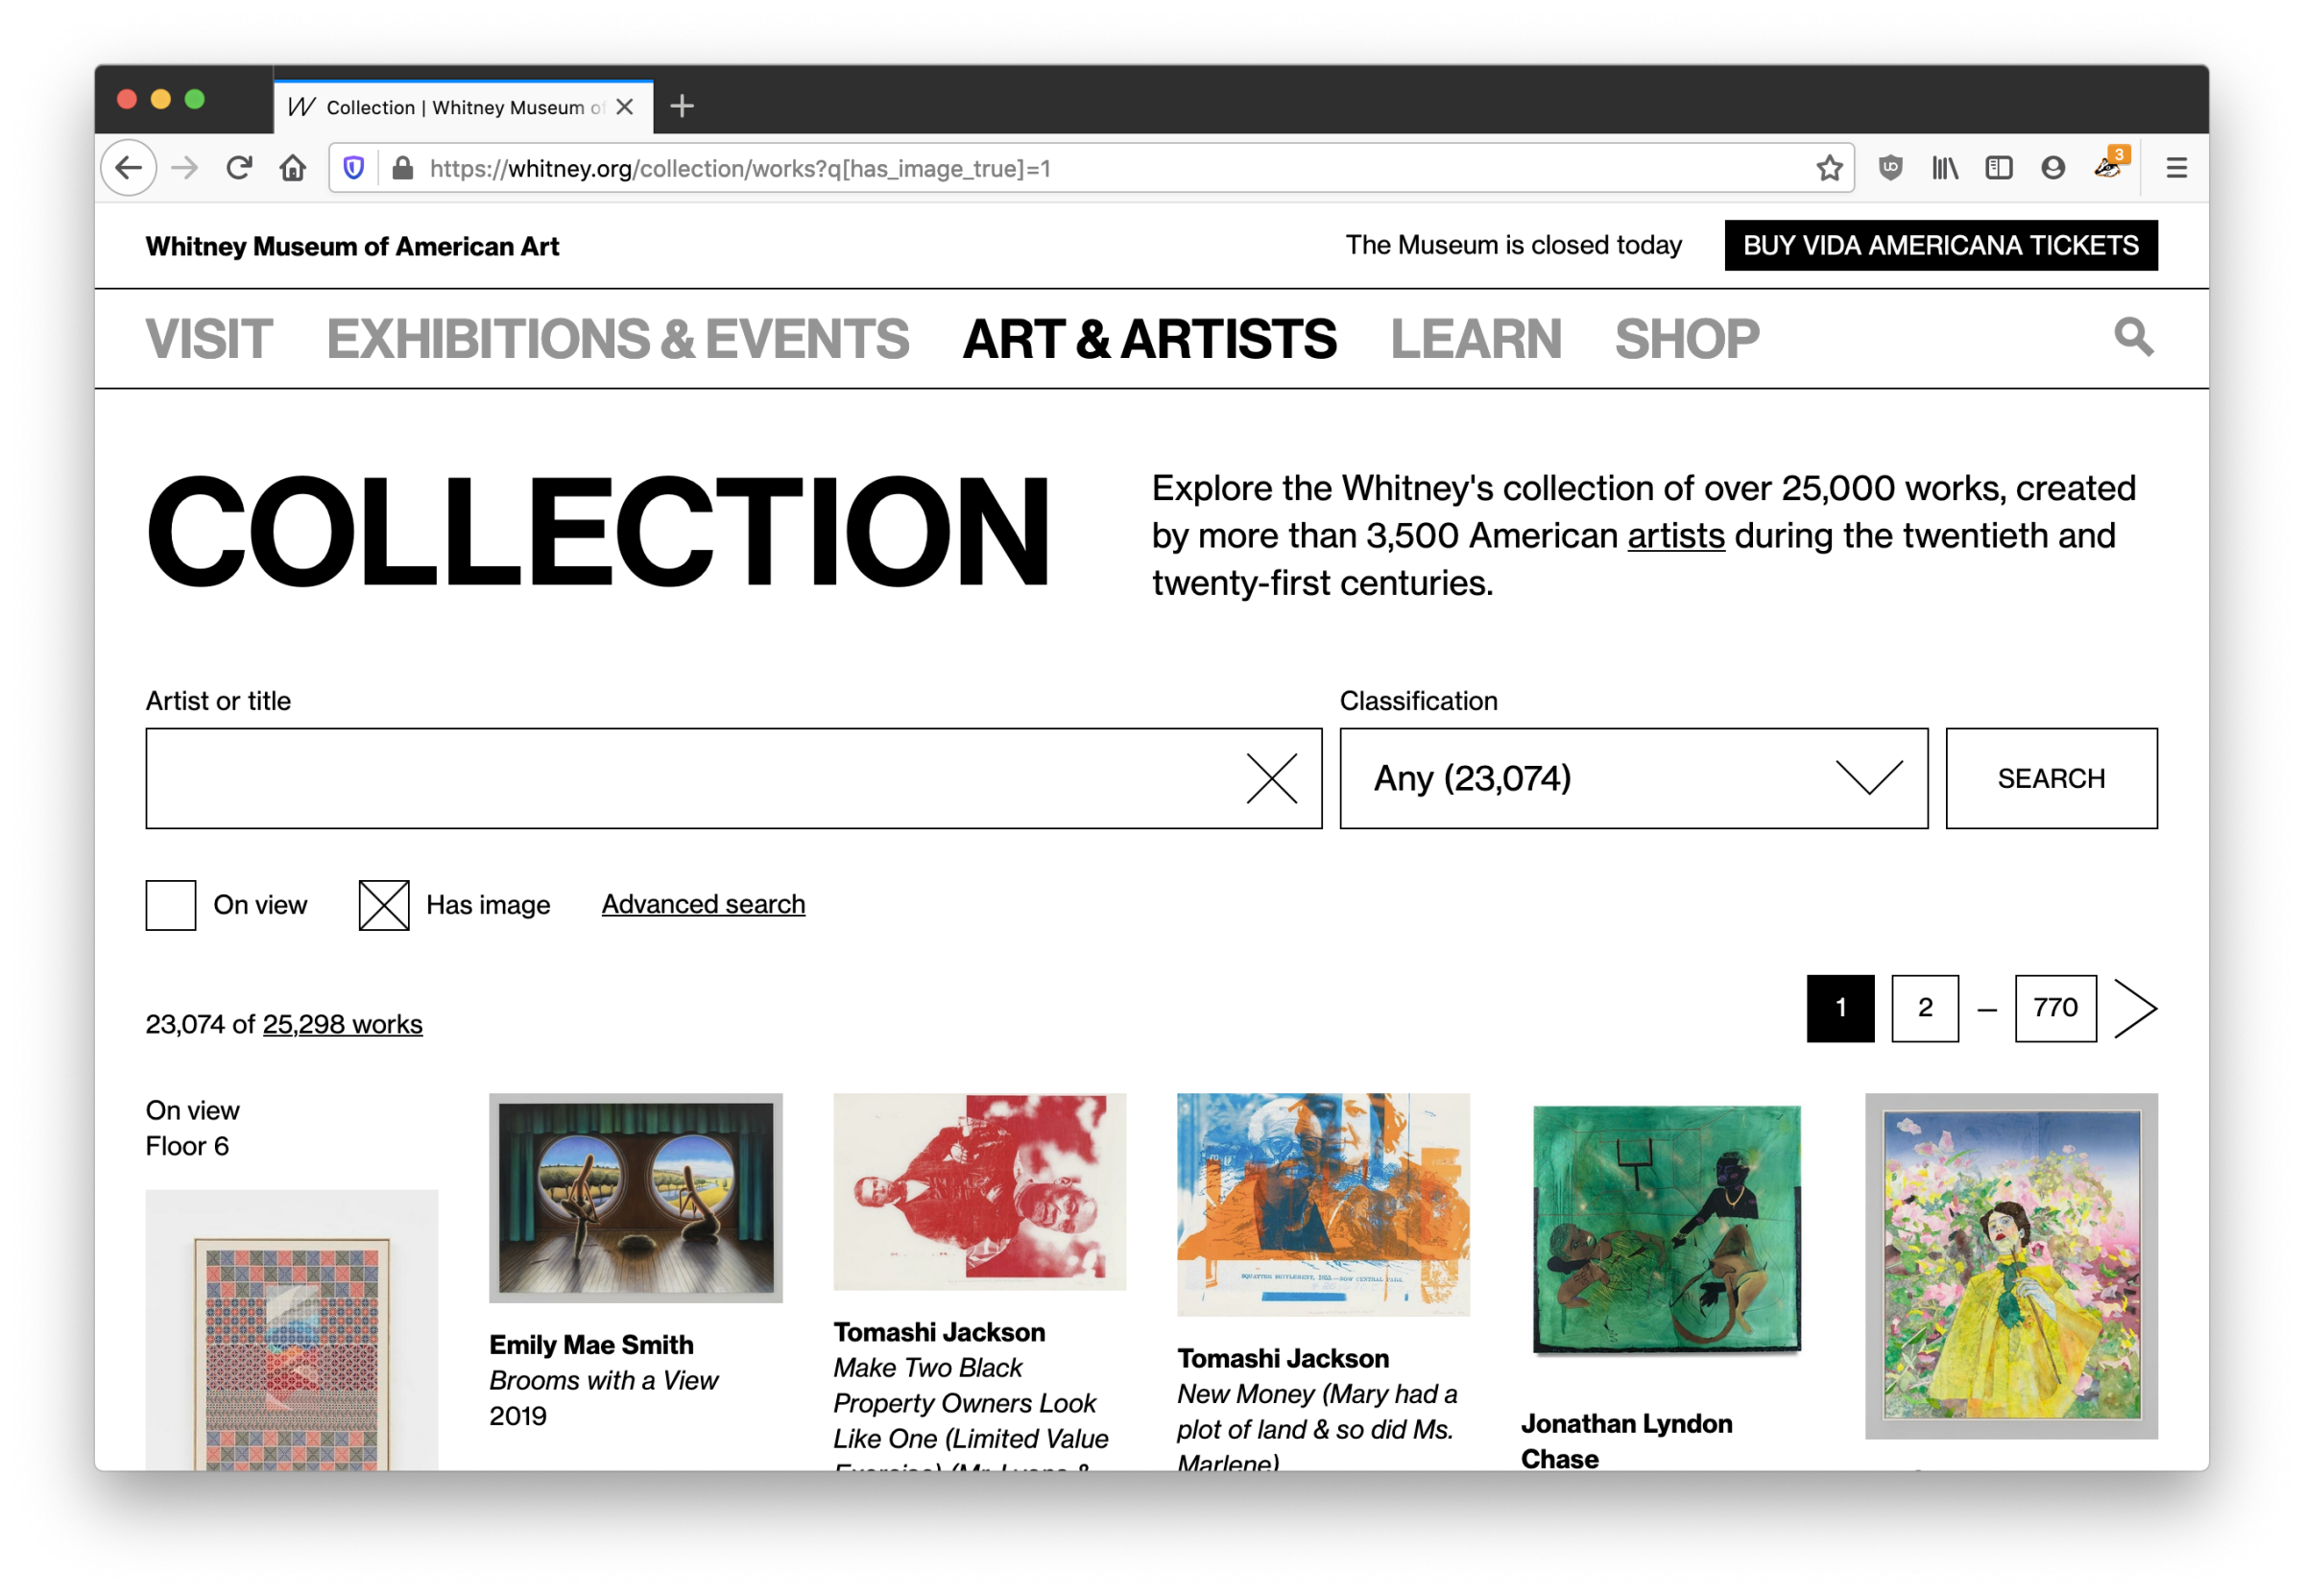 Screenshot of the whitney.org collection screen, with a search bar and a number of artworks visible.